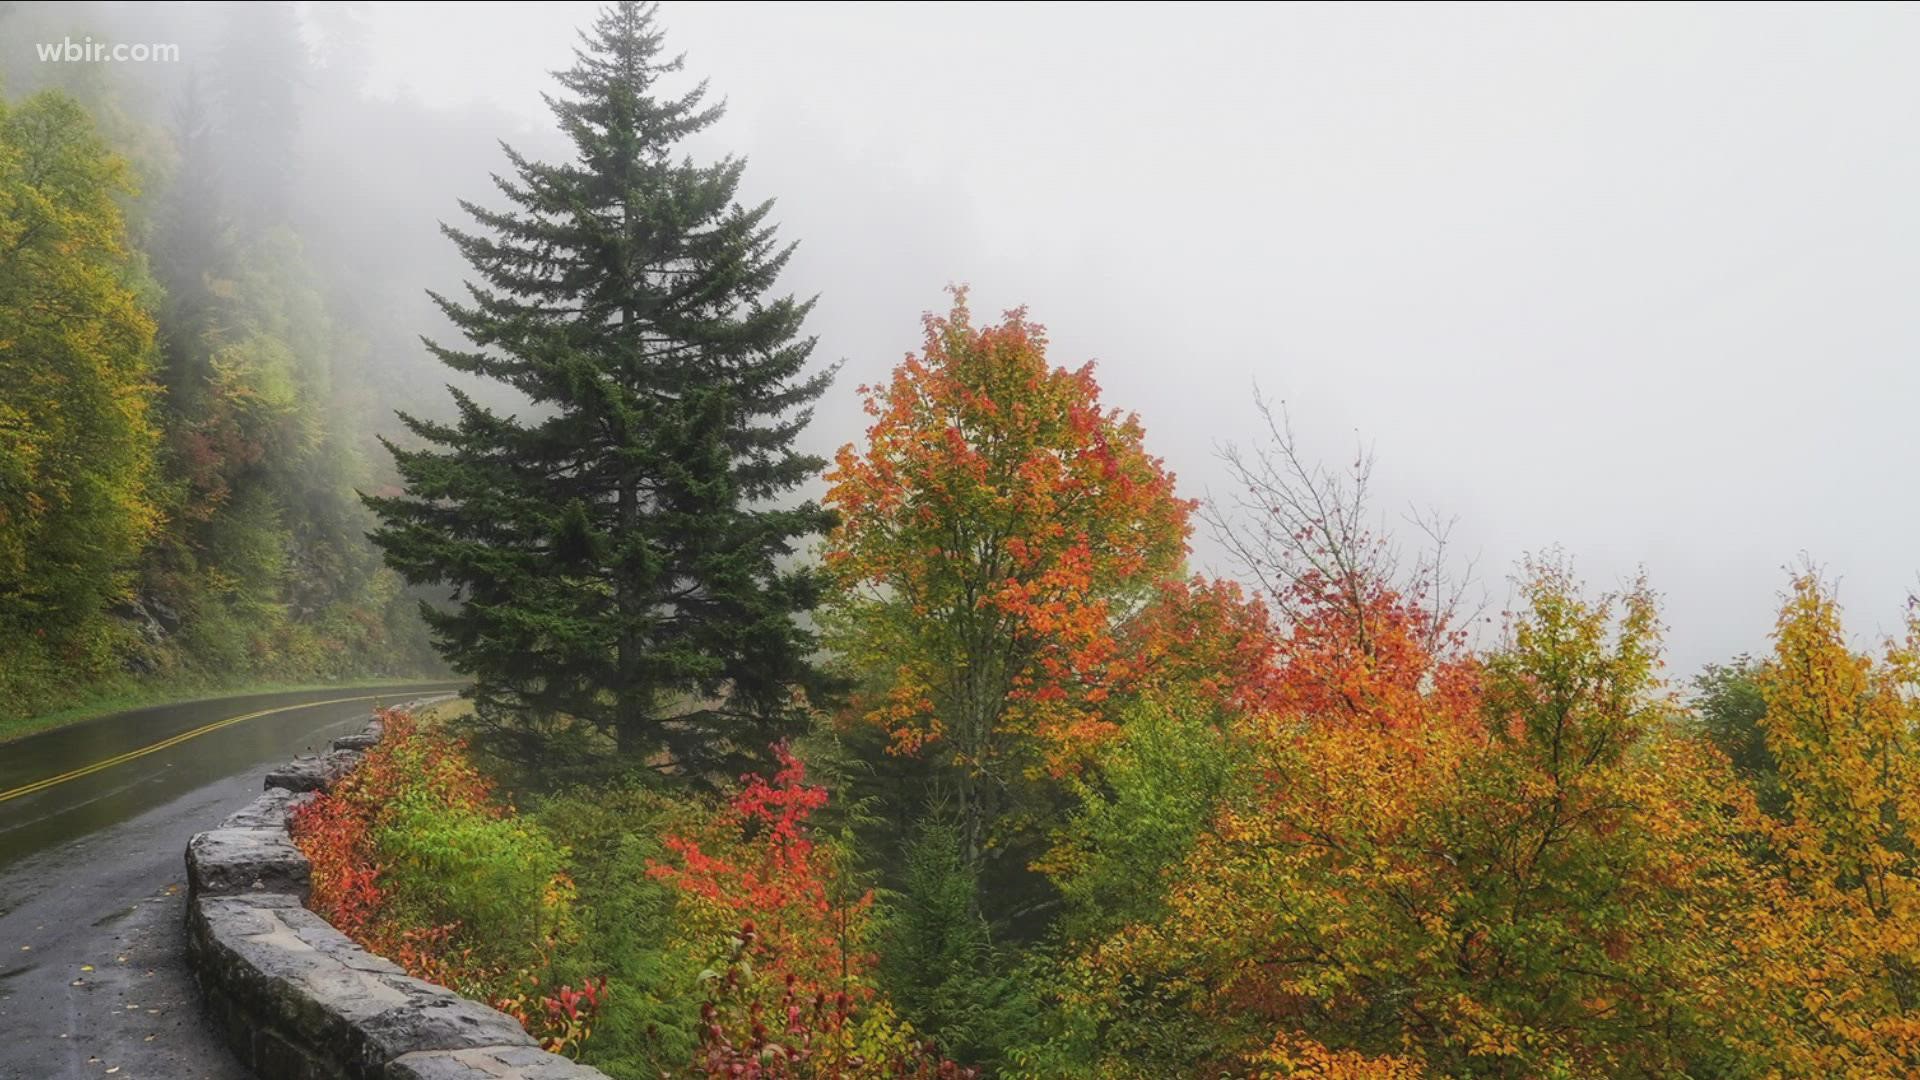 Gatlinburg shared the fall colors on its Facebook page.